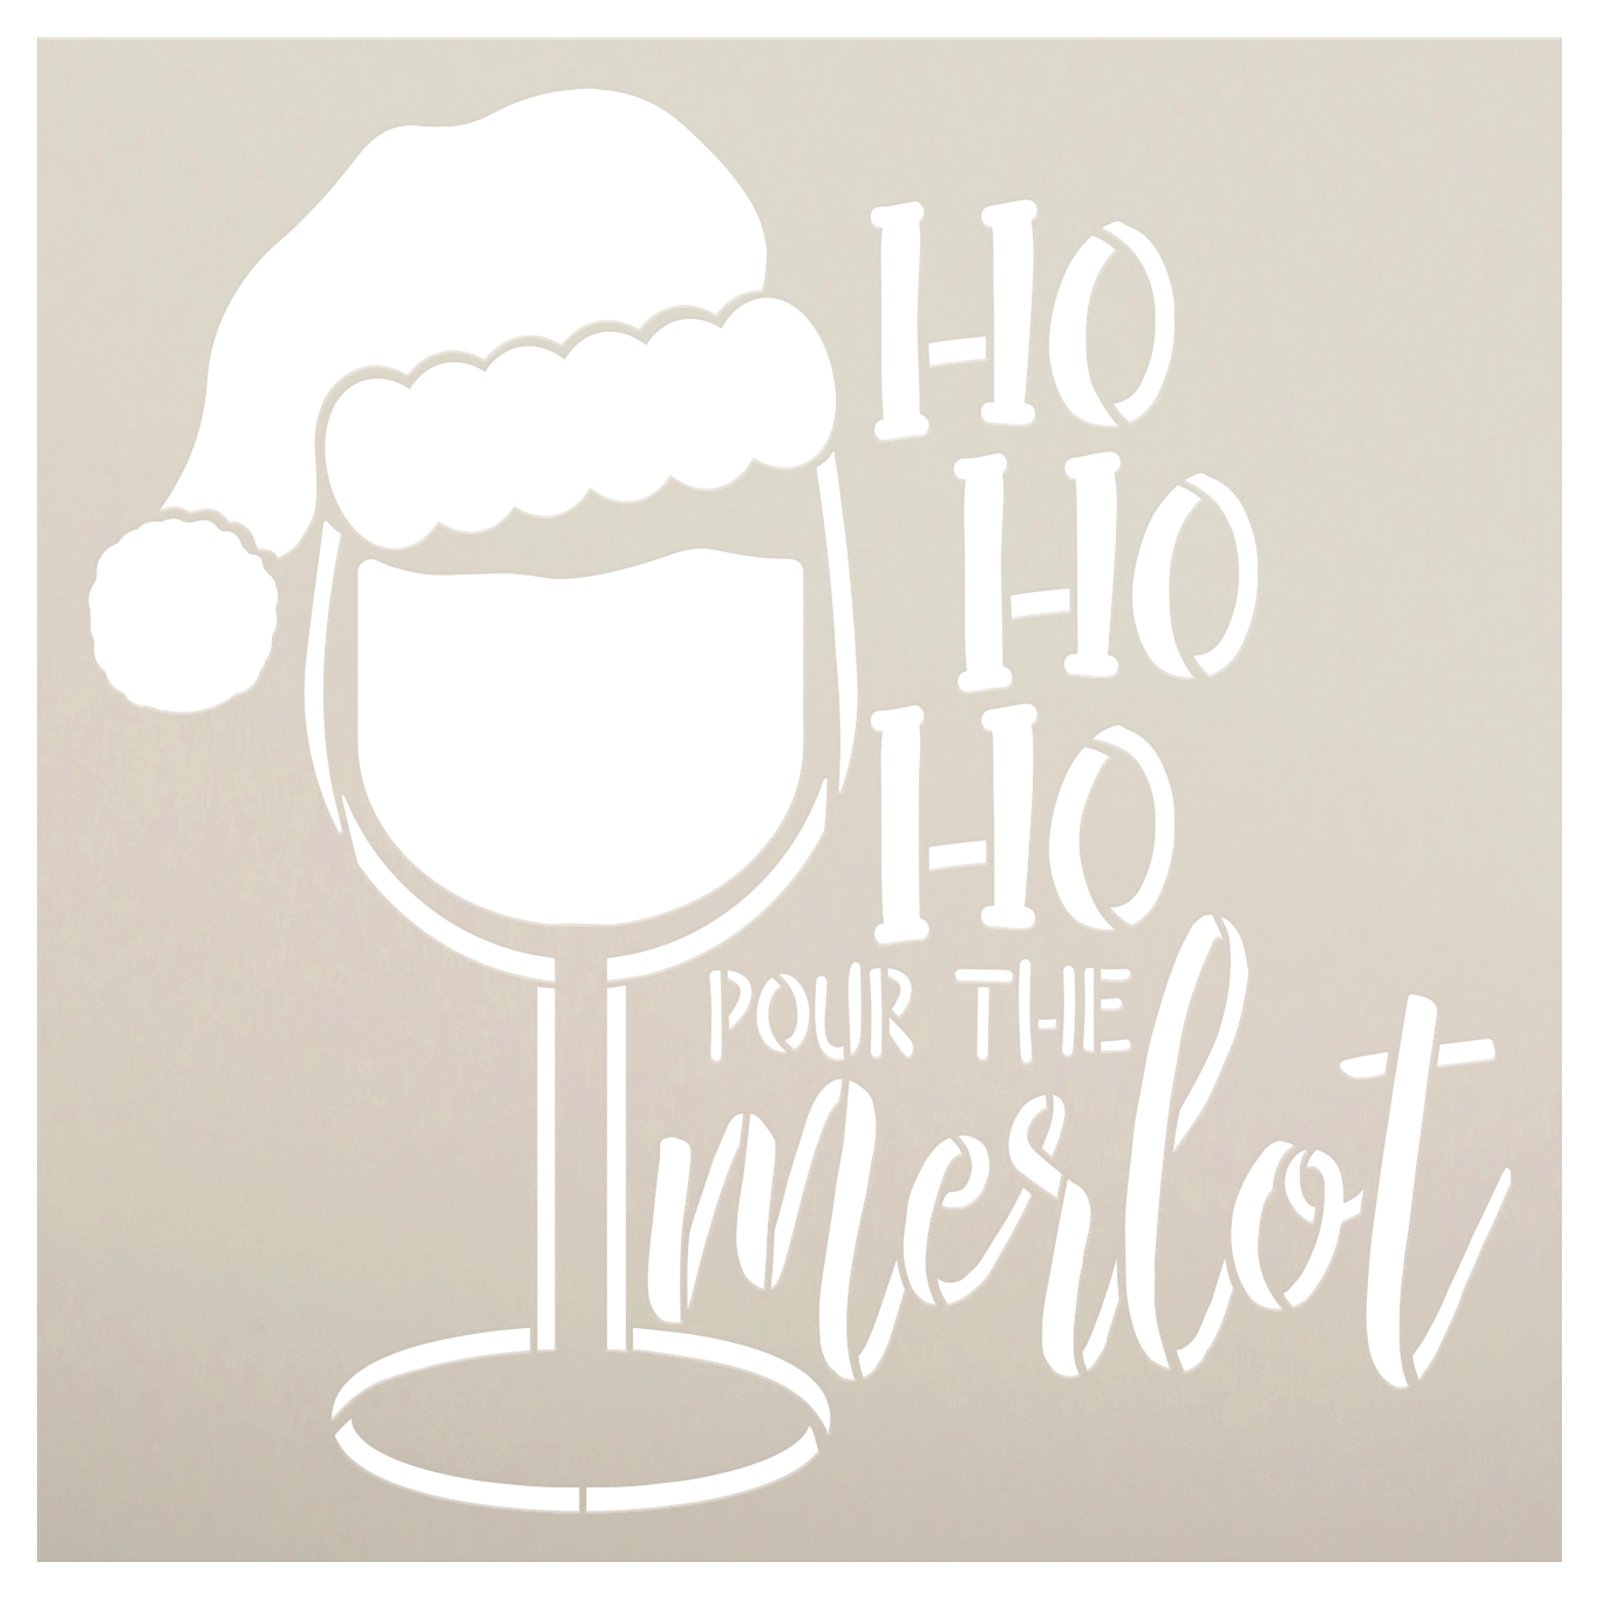 Ho Ho Ho Pour The Merlot Stencil by StudioR12 - Select Size - USA Made - Craft DIY Winter & Wine Decor | Paint Seasonal Wood Sign for Kitchen Living Room